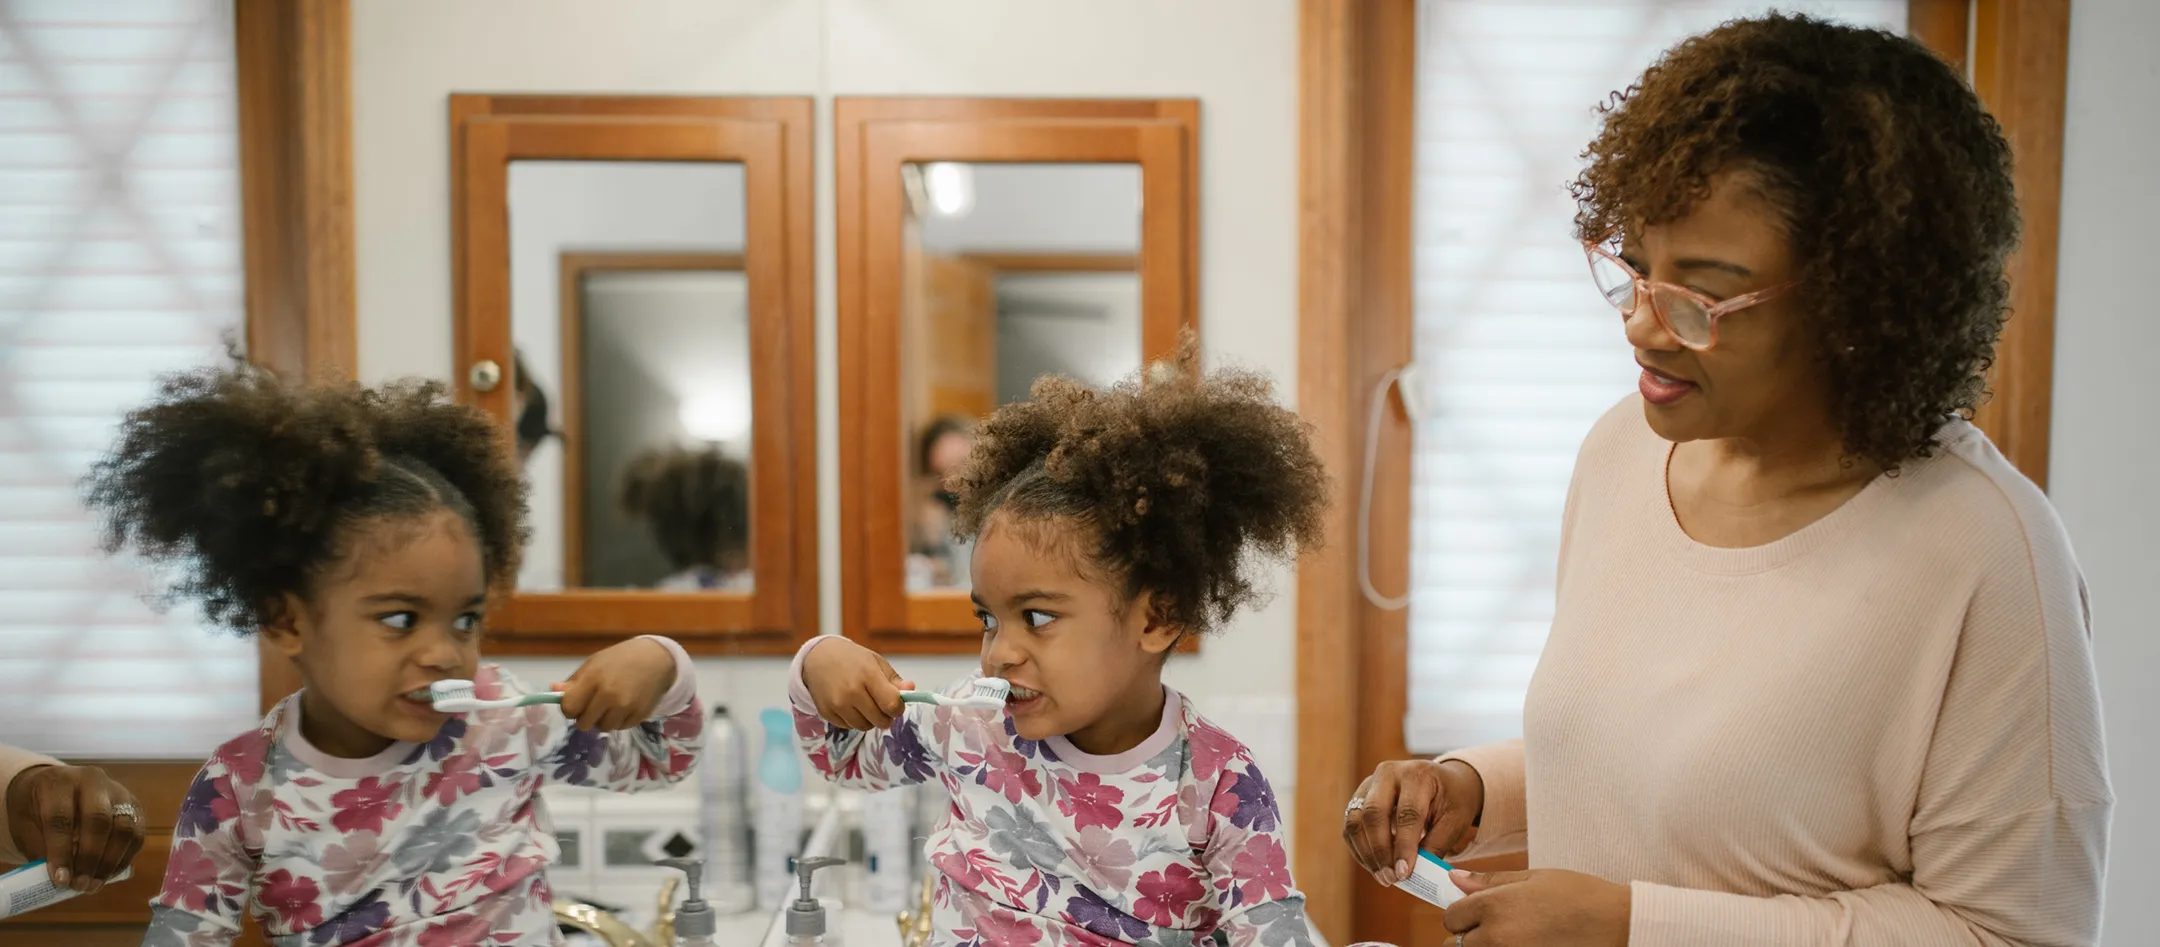 child brushes teeth in the mirror while female relative looks on and smiles